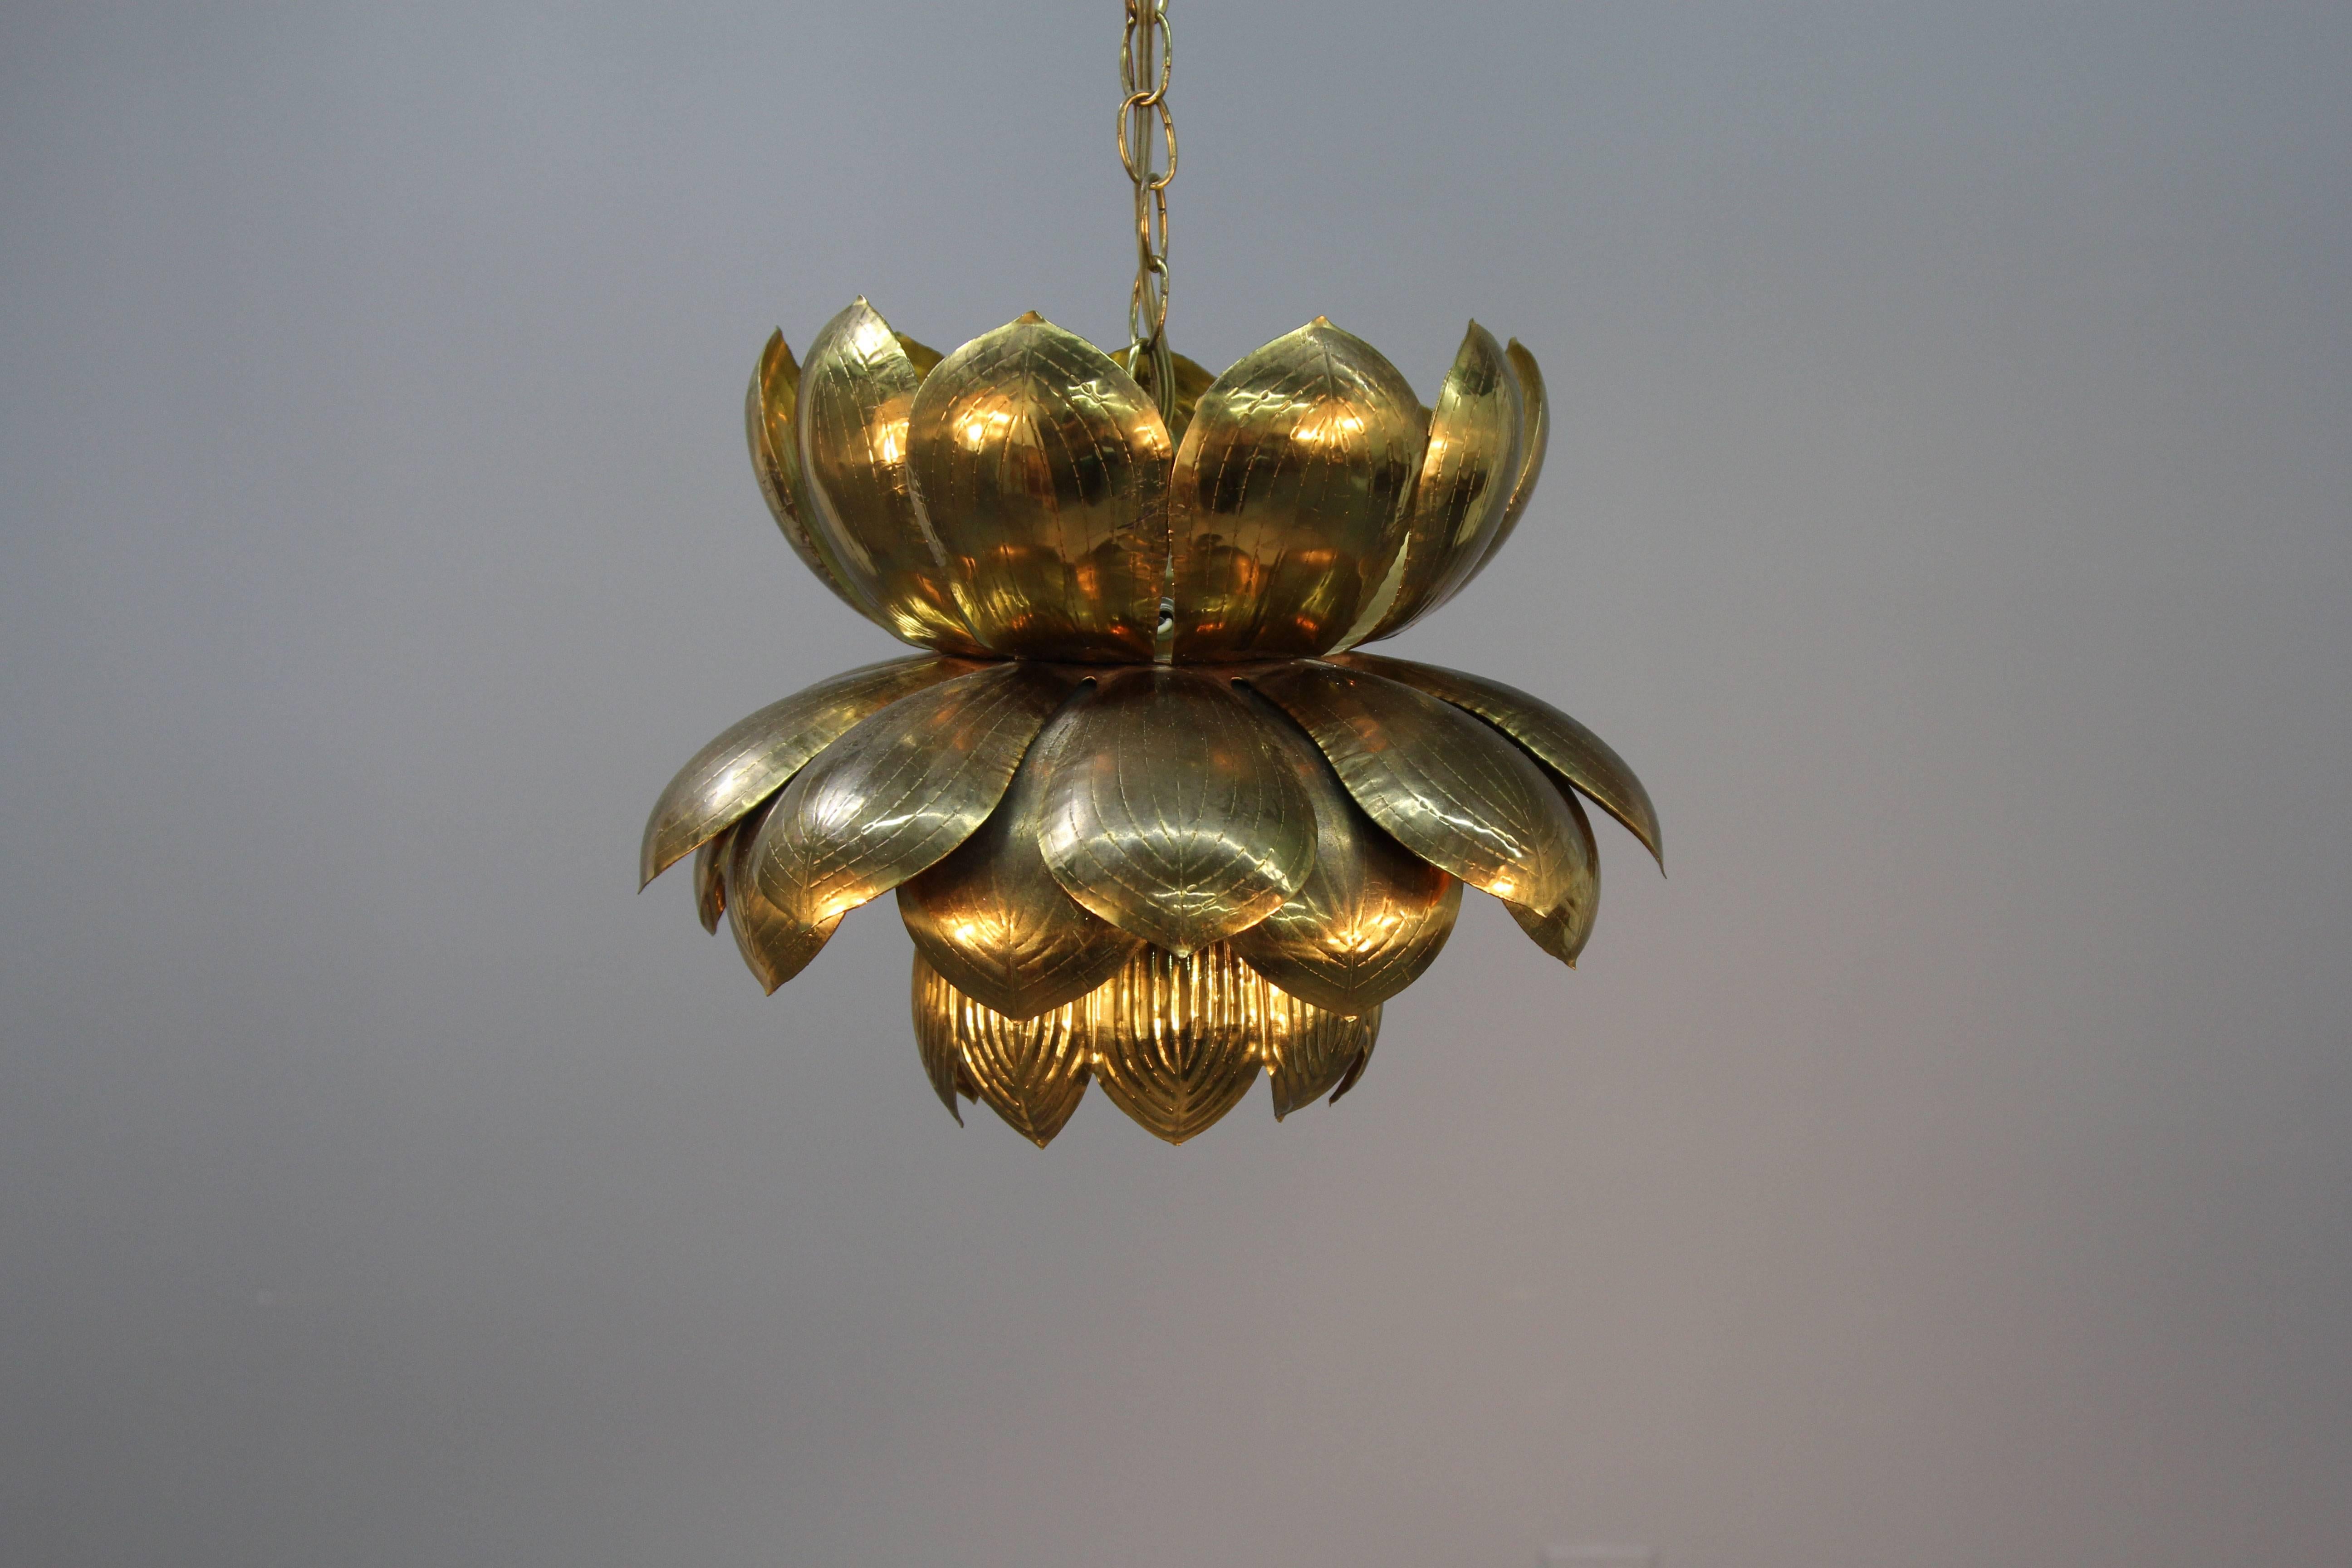 Etched and polished/lacquered brass light fixture. Four petal layers with one standard socket and three candelabra sockets on top of the blossom.

Original ceiling plate with Feldman label.